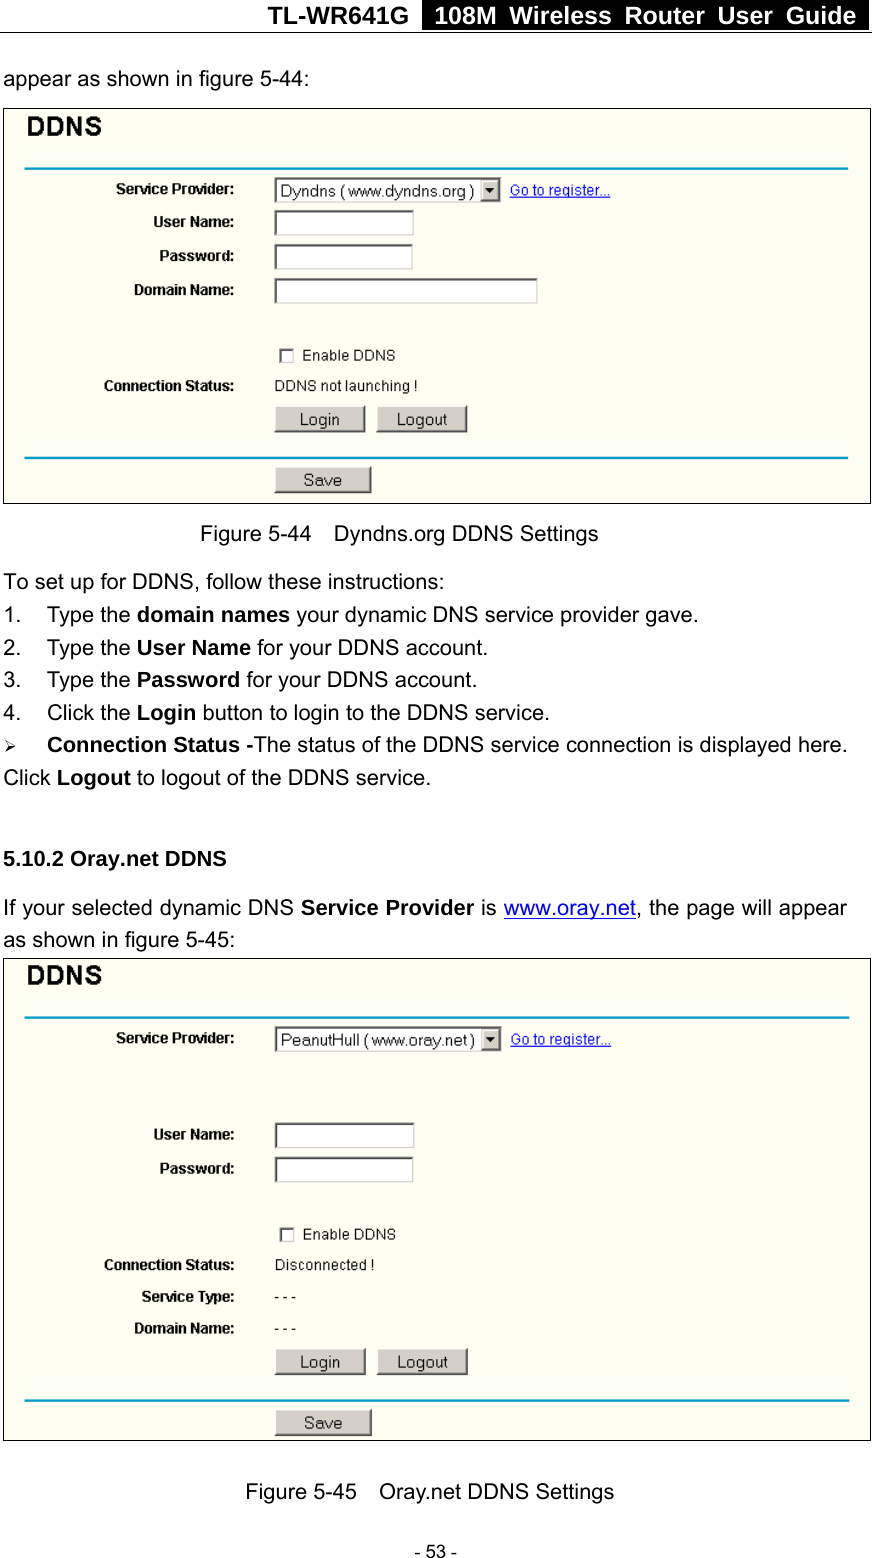 TL-WR641G   108M Wireless Router User Guide  appear as shown in figure 5-44:  Figure 5-44    Dyndns.org DDNS Settings To set up for DDNS, follow these instructions: 1. Type the domain names your dynamic DNS service provider gave.   2. Type the User Name for your DDNS account.   3. Type the Password for your DDNS account.   4. Click the Login button to login to the DDNS service. ¾ Connection Status -The status of the DDNS service connection is displayed here. Click Logout to logout of the DDNS service.  5.10.2 Oray.net DDNS If your selected dynamic DNS Service Provider is www.oray.net, the page will appear as shown in figure 5-45:   Figure 5-45    Oray.net DDNS Settings  - 53 - 